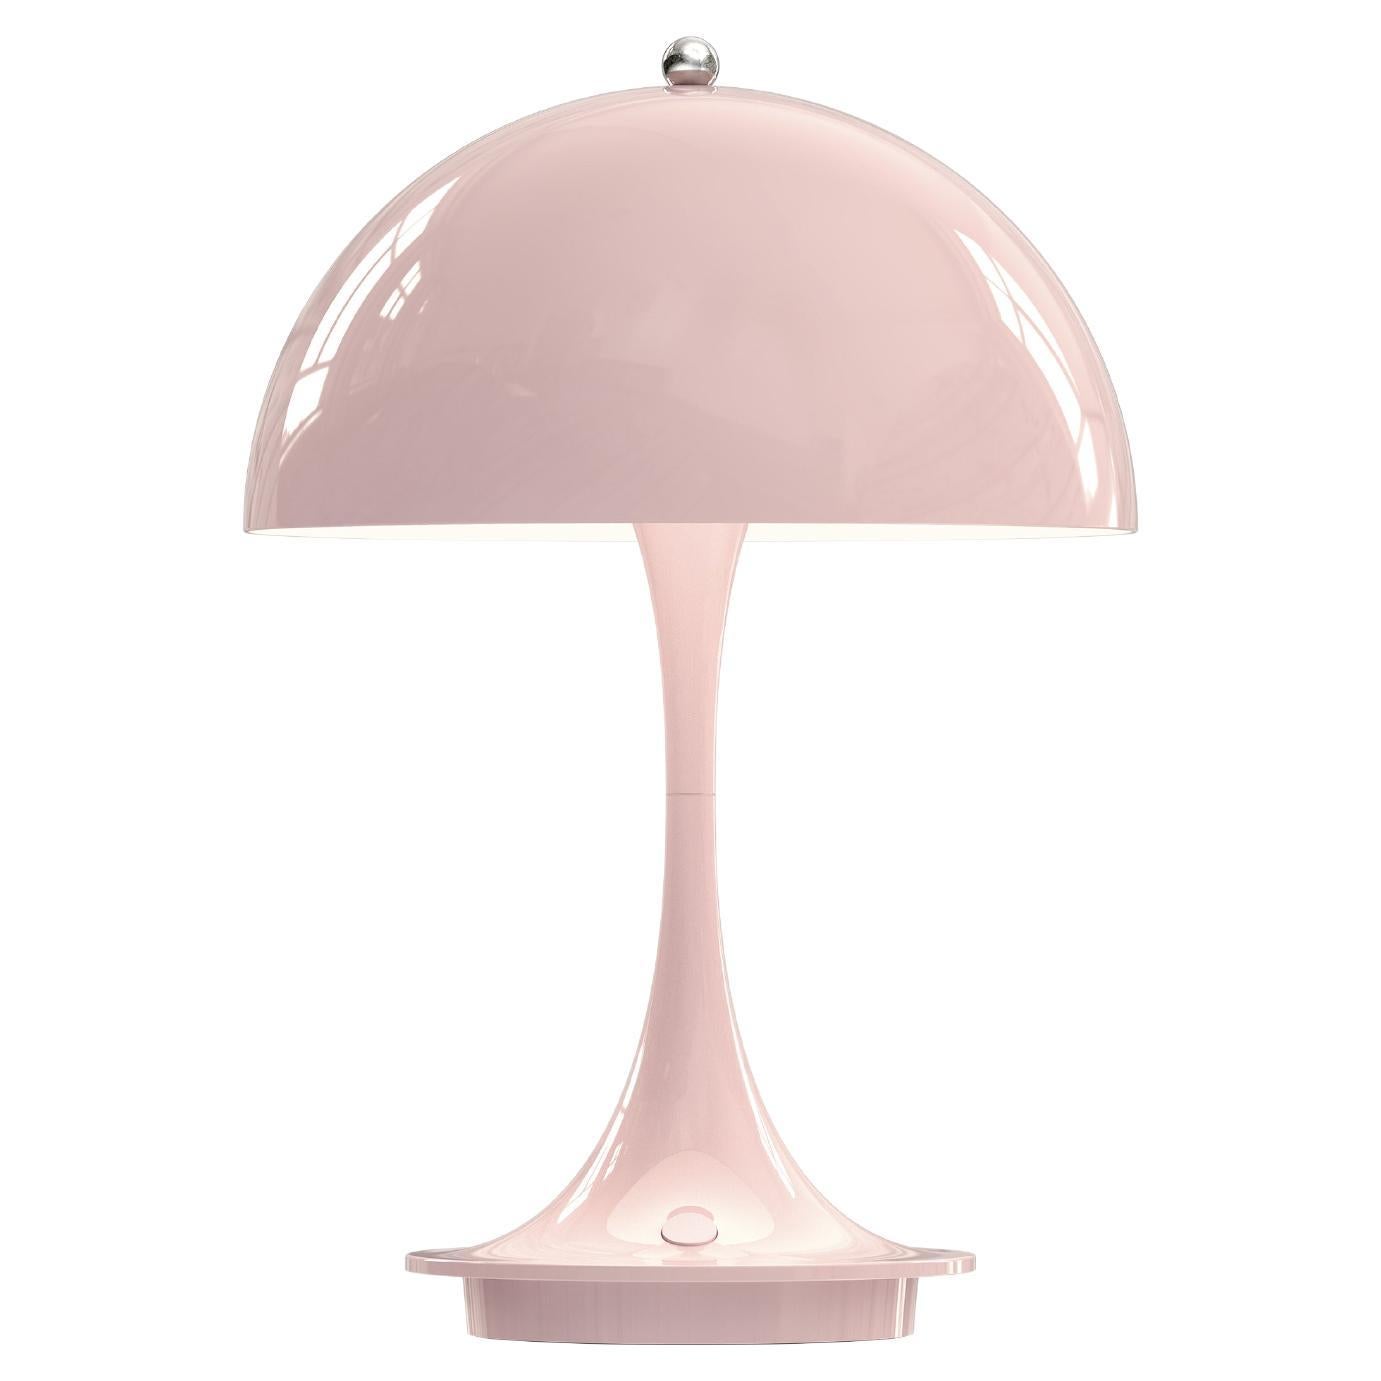 Panthella 160 Portable Table Lamp For Sale